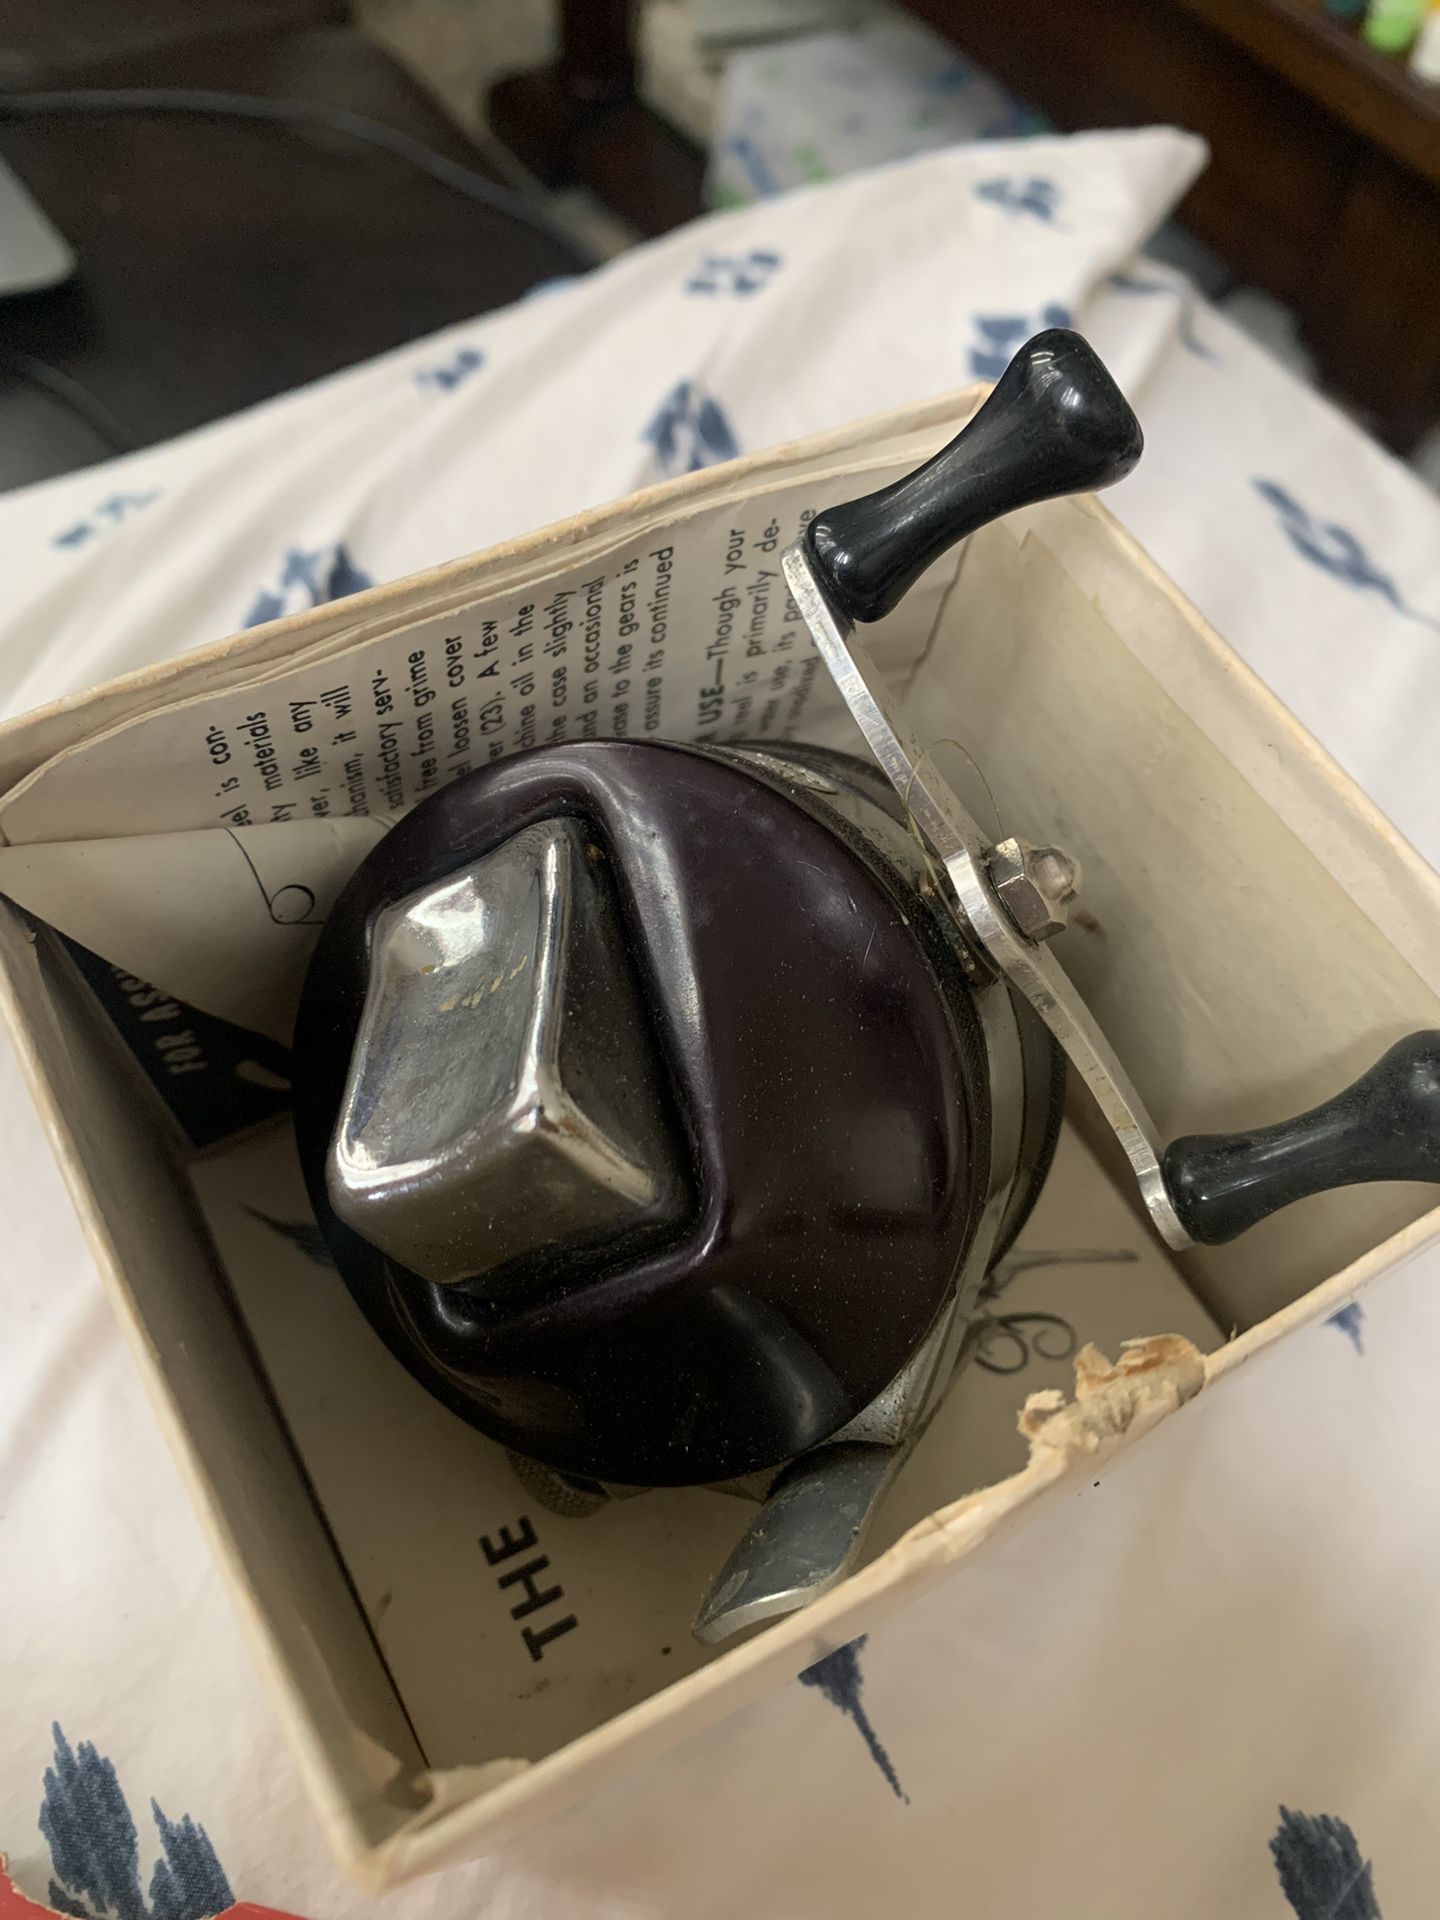 Vintage Zebco Model 33 Fishing Reel. Appears To Be Brand New. Never Used  for Sale in San Diego, CA - OfferUp